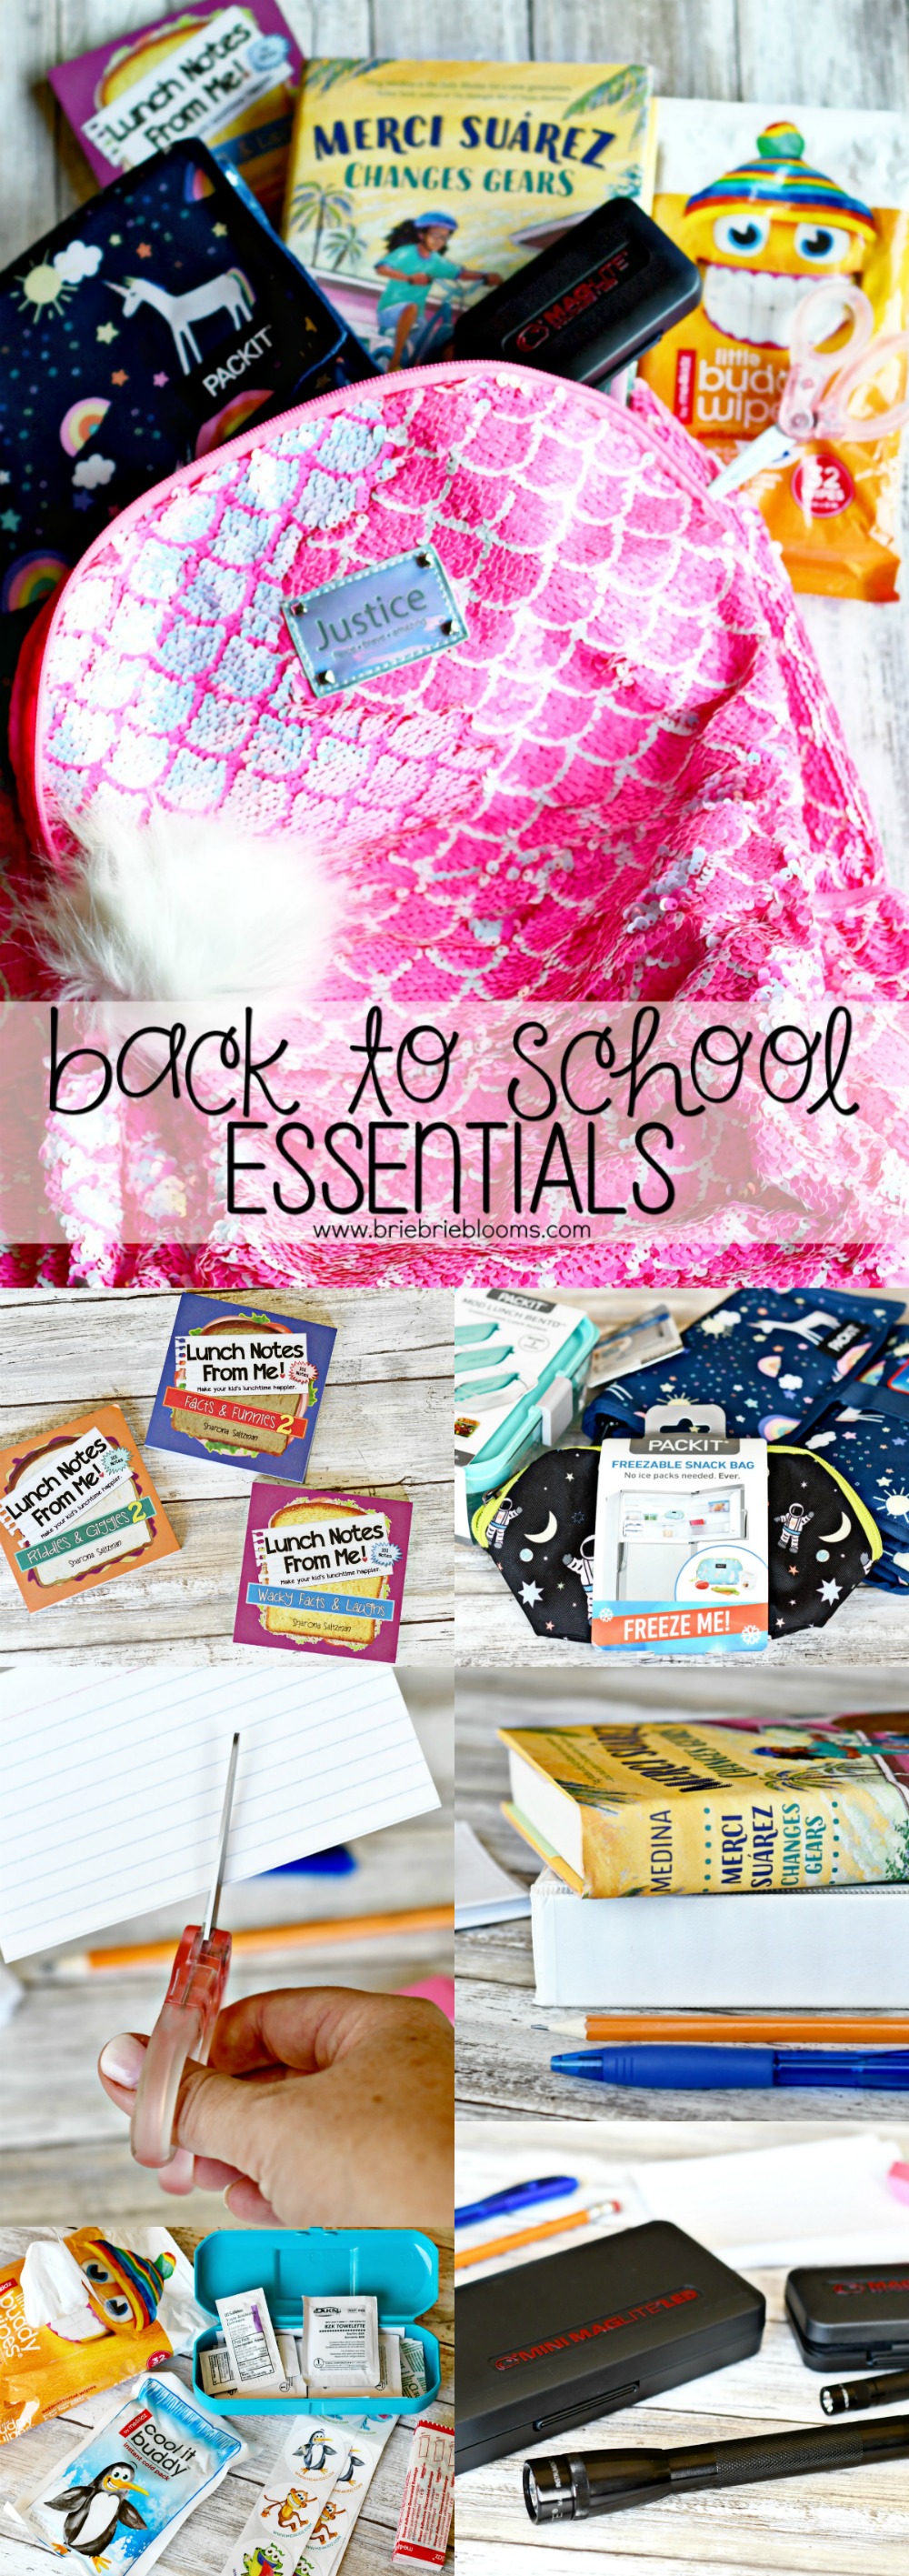 See all our favorite back to school essentials including backpacks, lunchboxes, lunch notes, first aid kits, flashlights, books, classroom supplies and more!